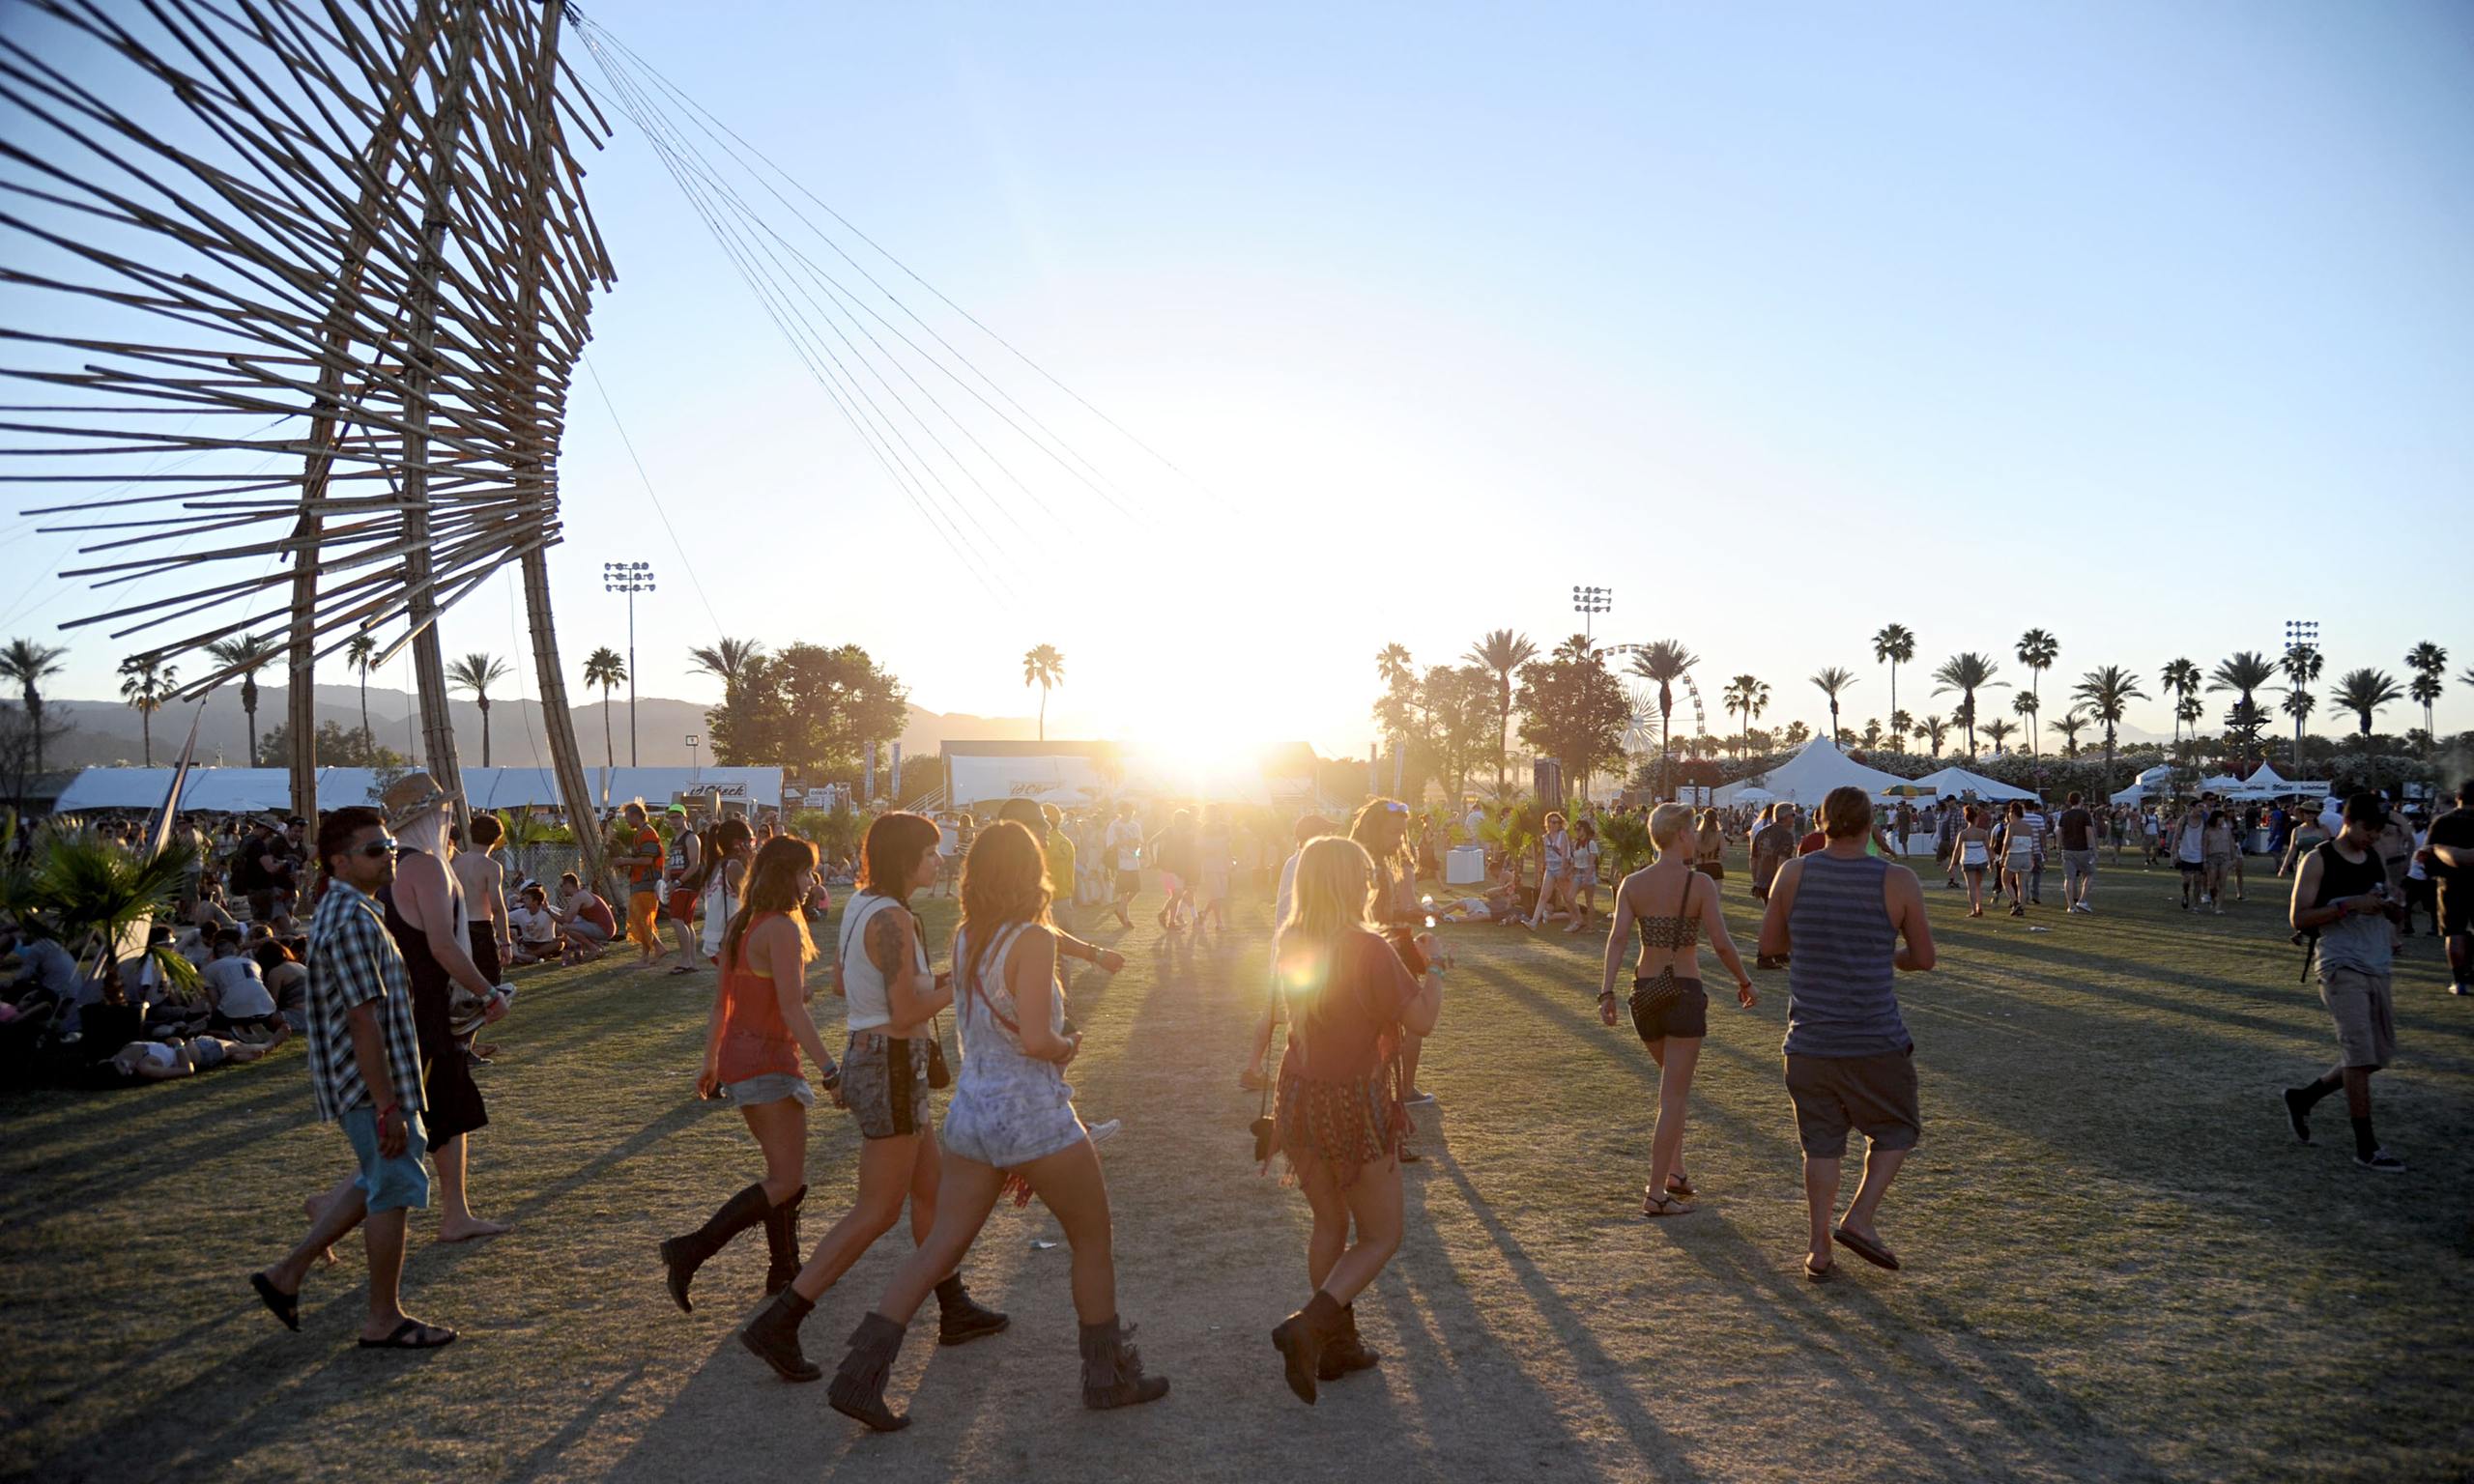 Coachella music festival and Palm Springs: the sound of California